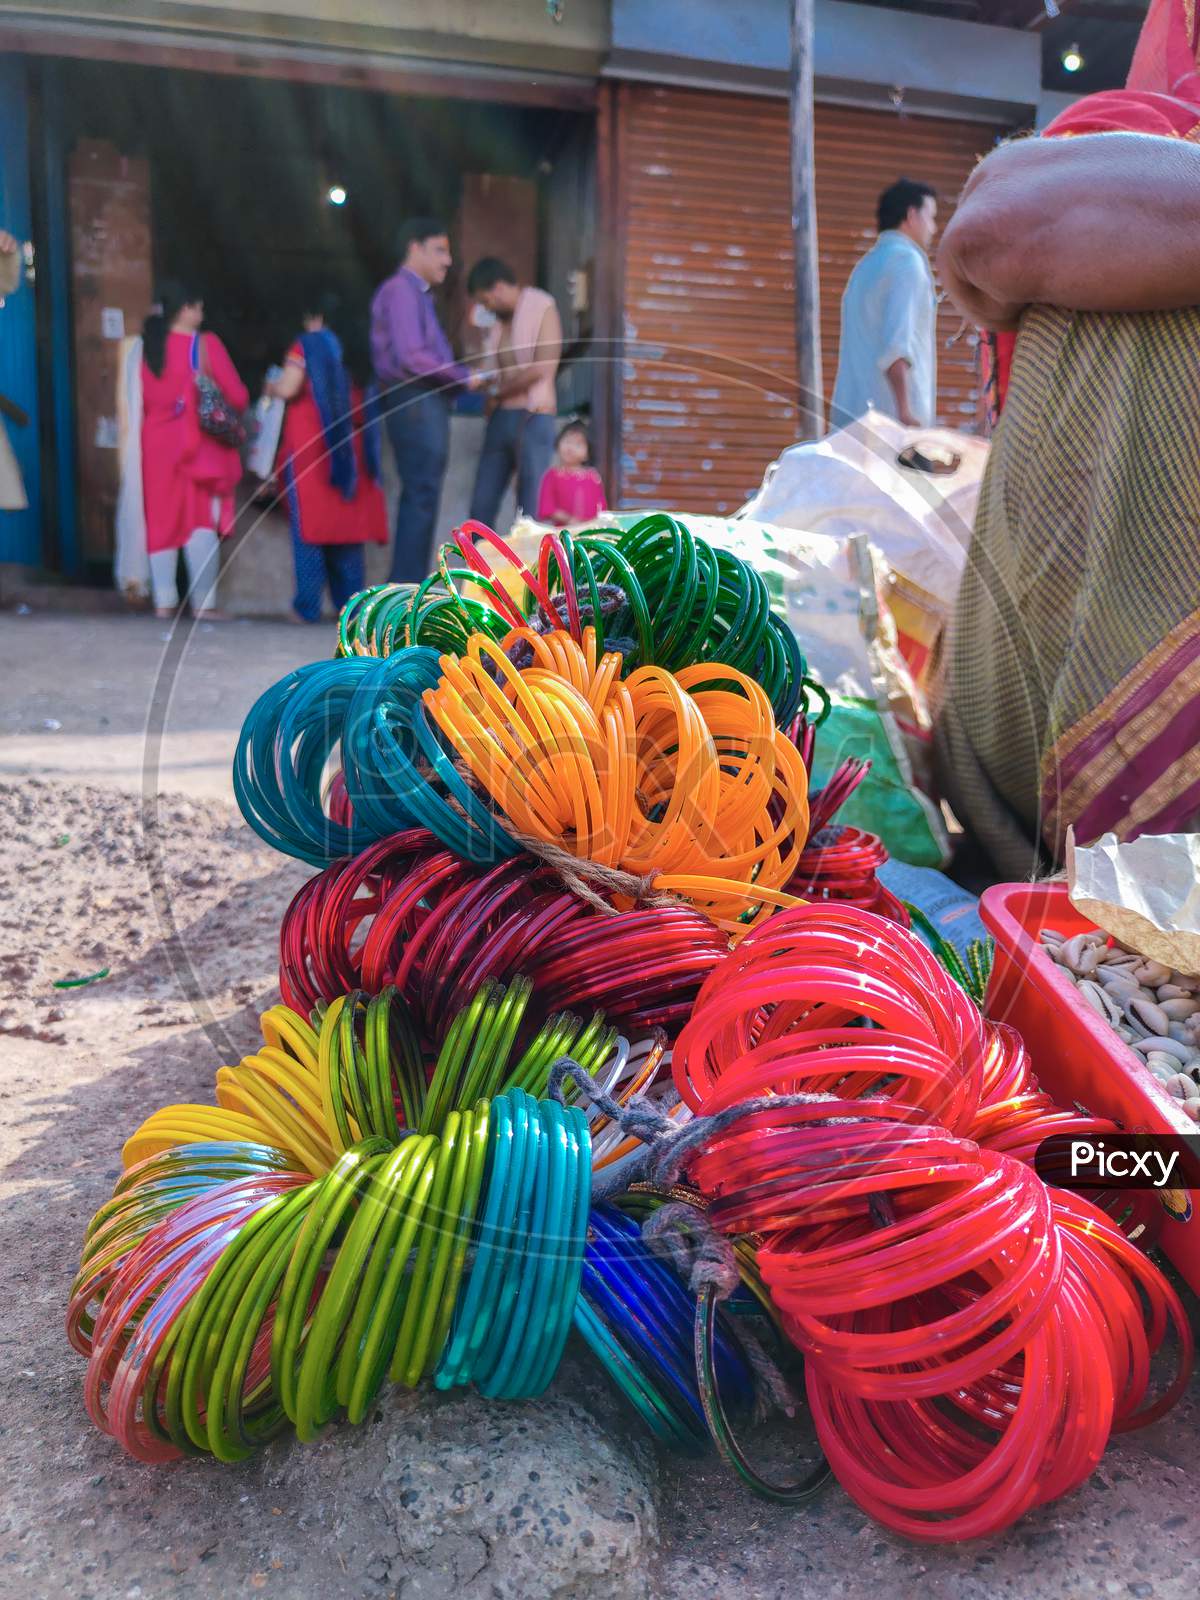 Stock Photo Of Bunch Of Colorful Bangles Made Of Glass Kept On Roadside For Sale In Sunny Afternoon At Indian Market ,Focus On Glass Bangles.